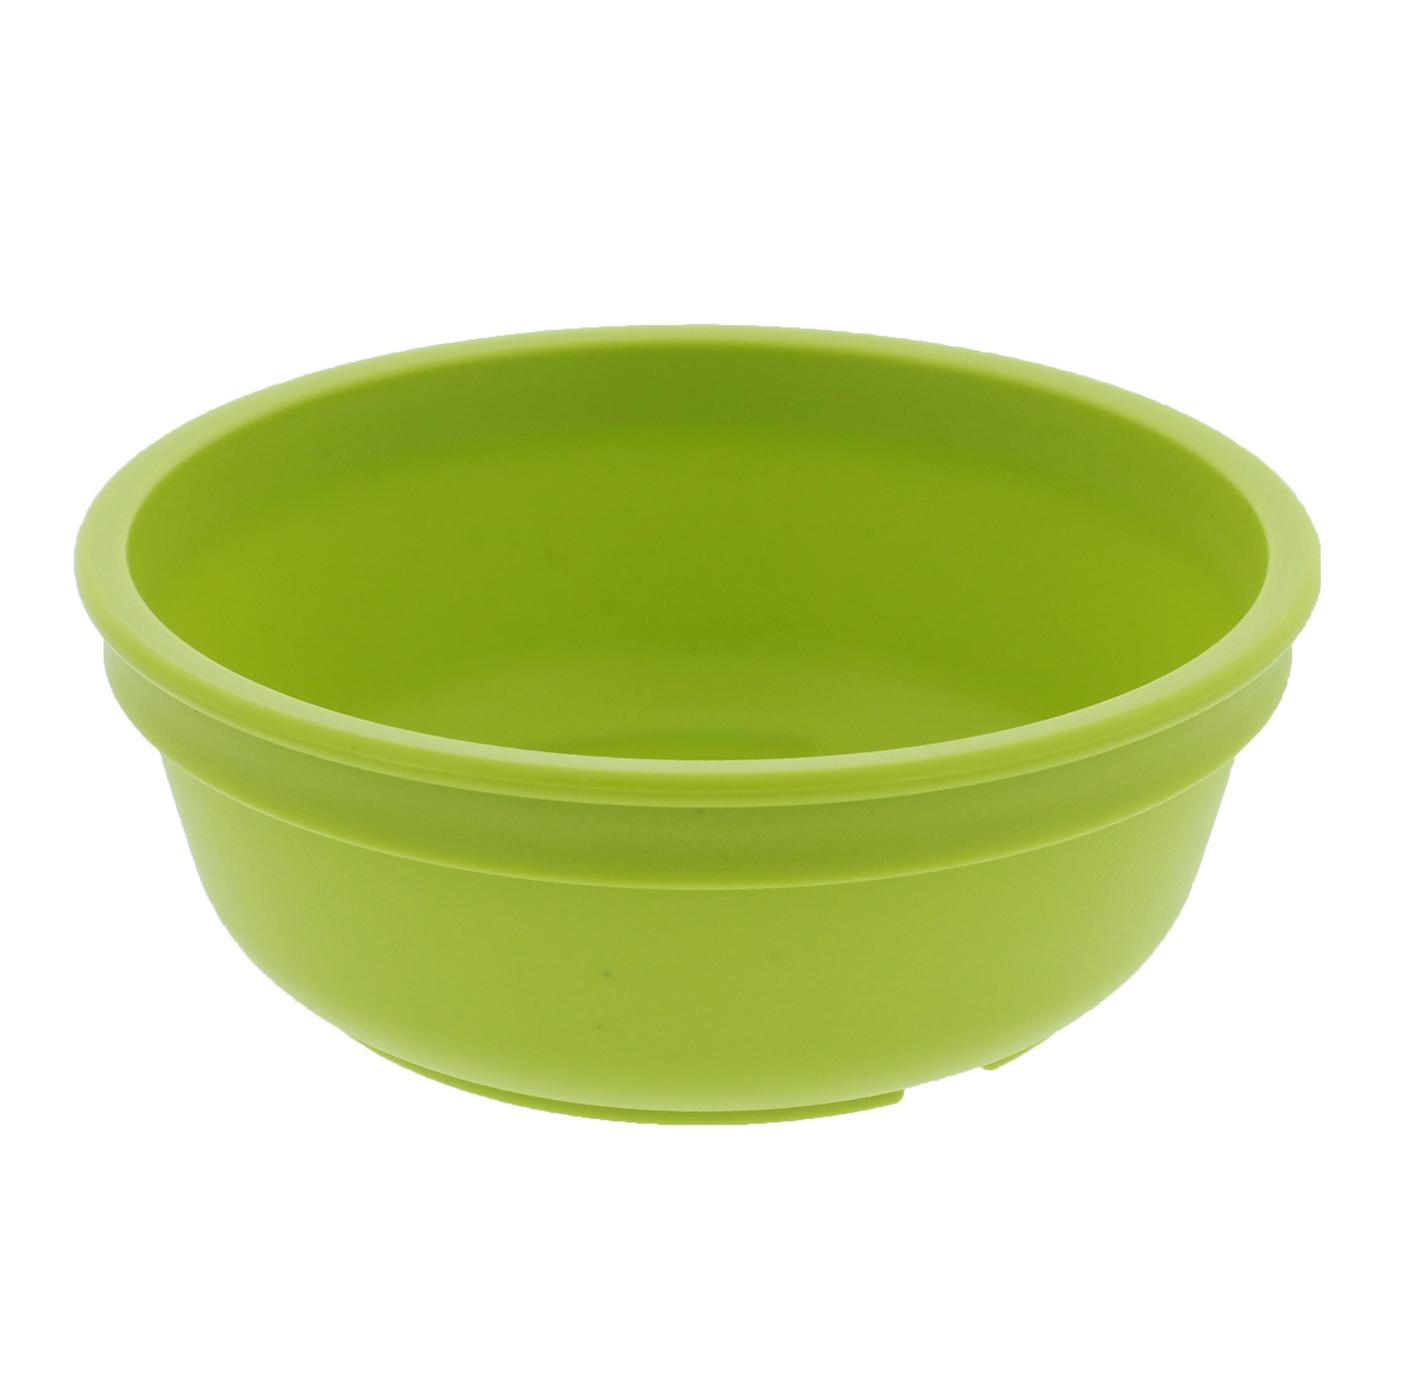 Re-Play Toddler Bowl, Assorted Colors; image 3 of 6